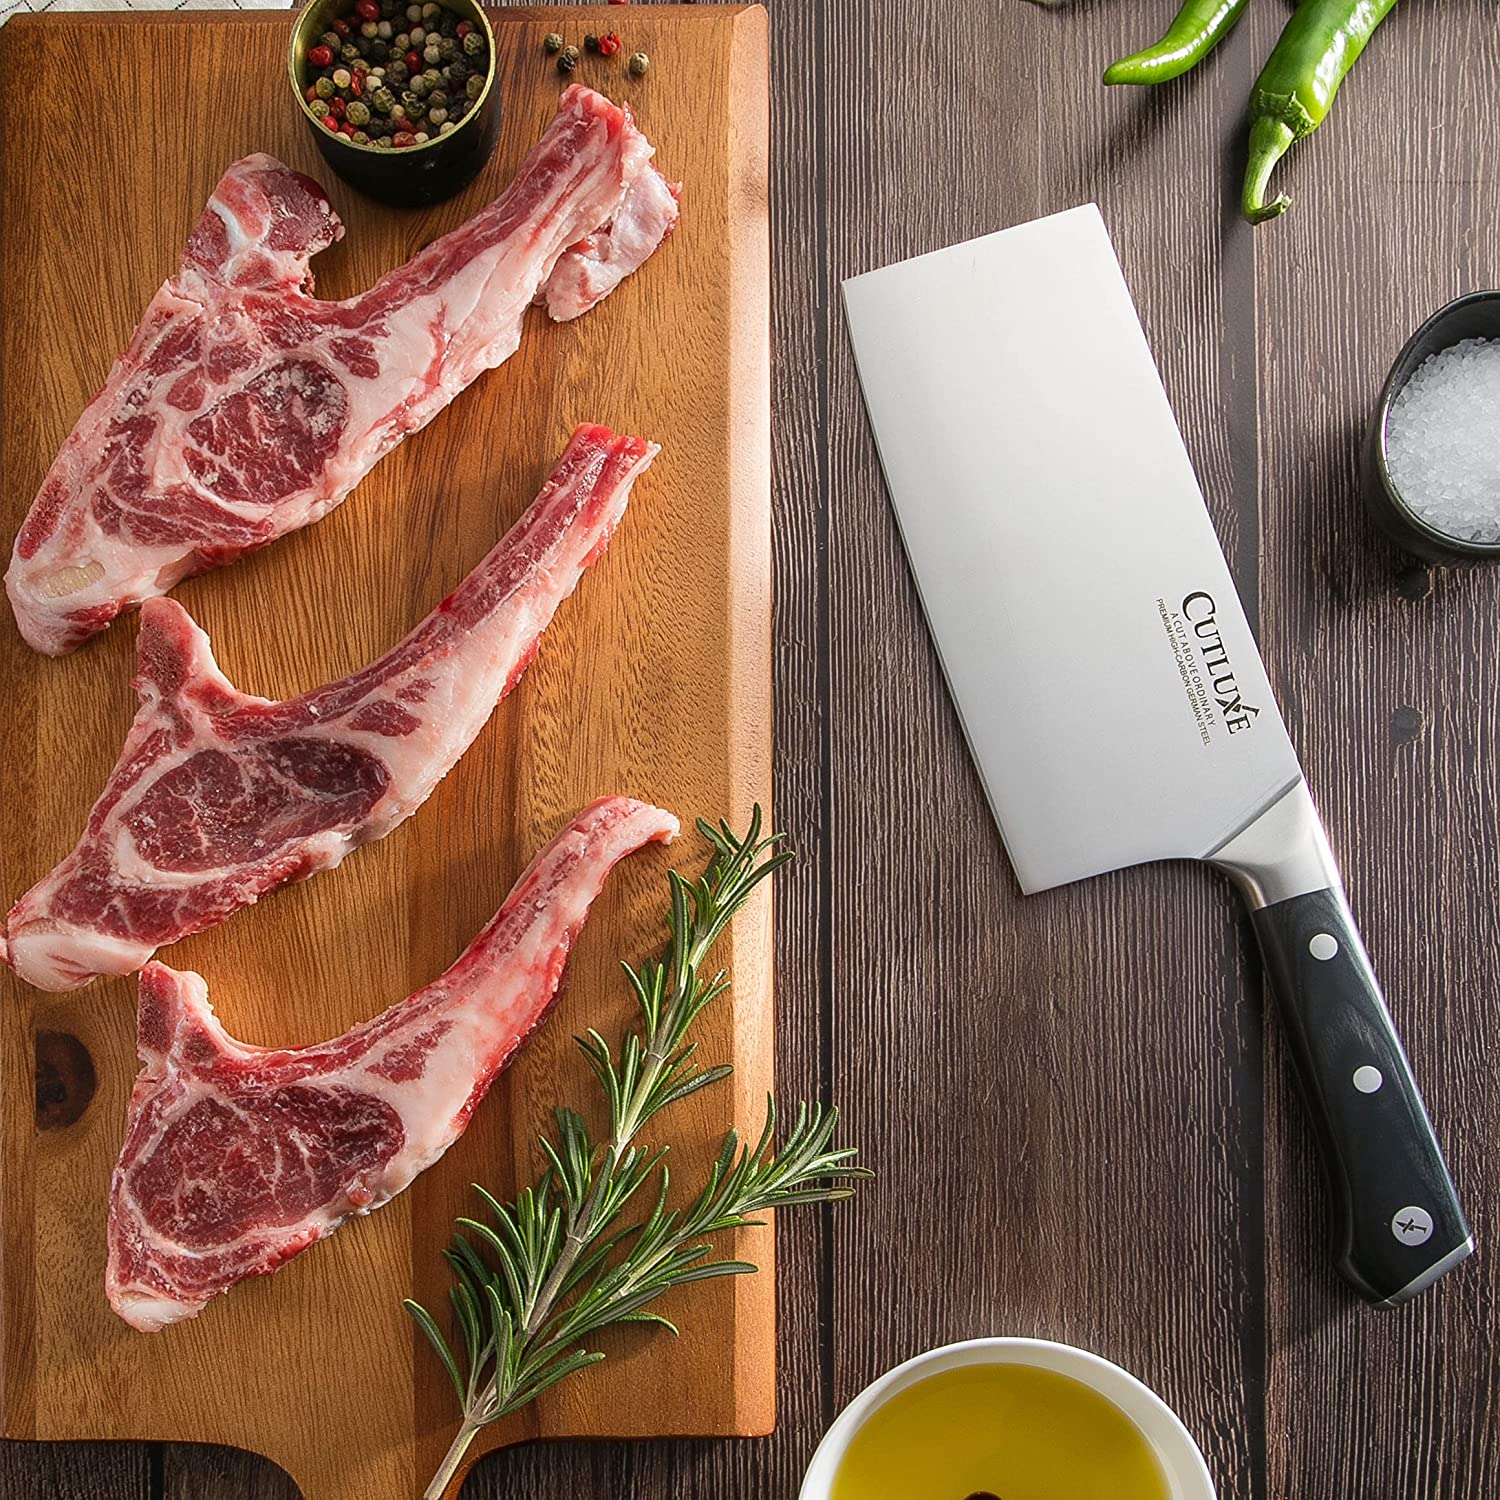 Lux Decor Kitchen Butcher Knife Stainless Steel - 7 Inch Multi